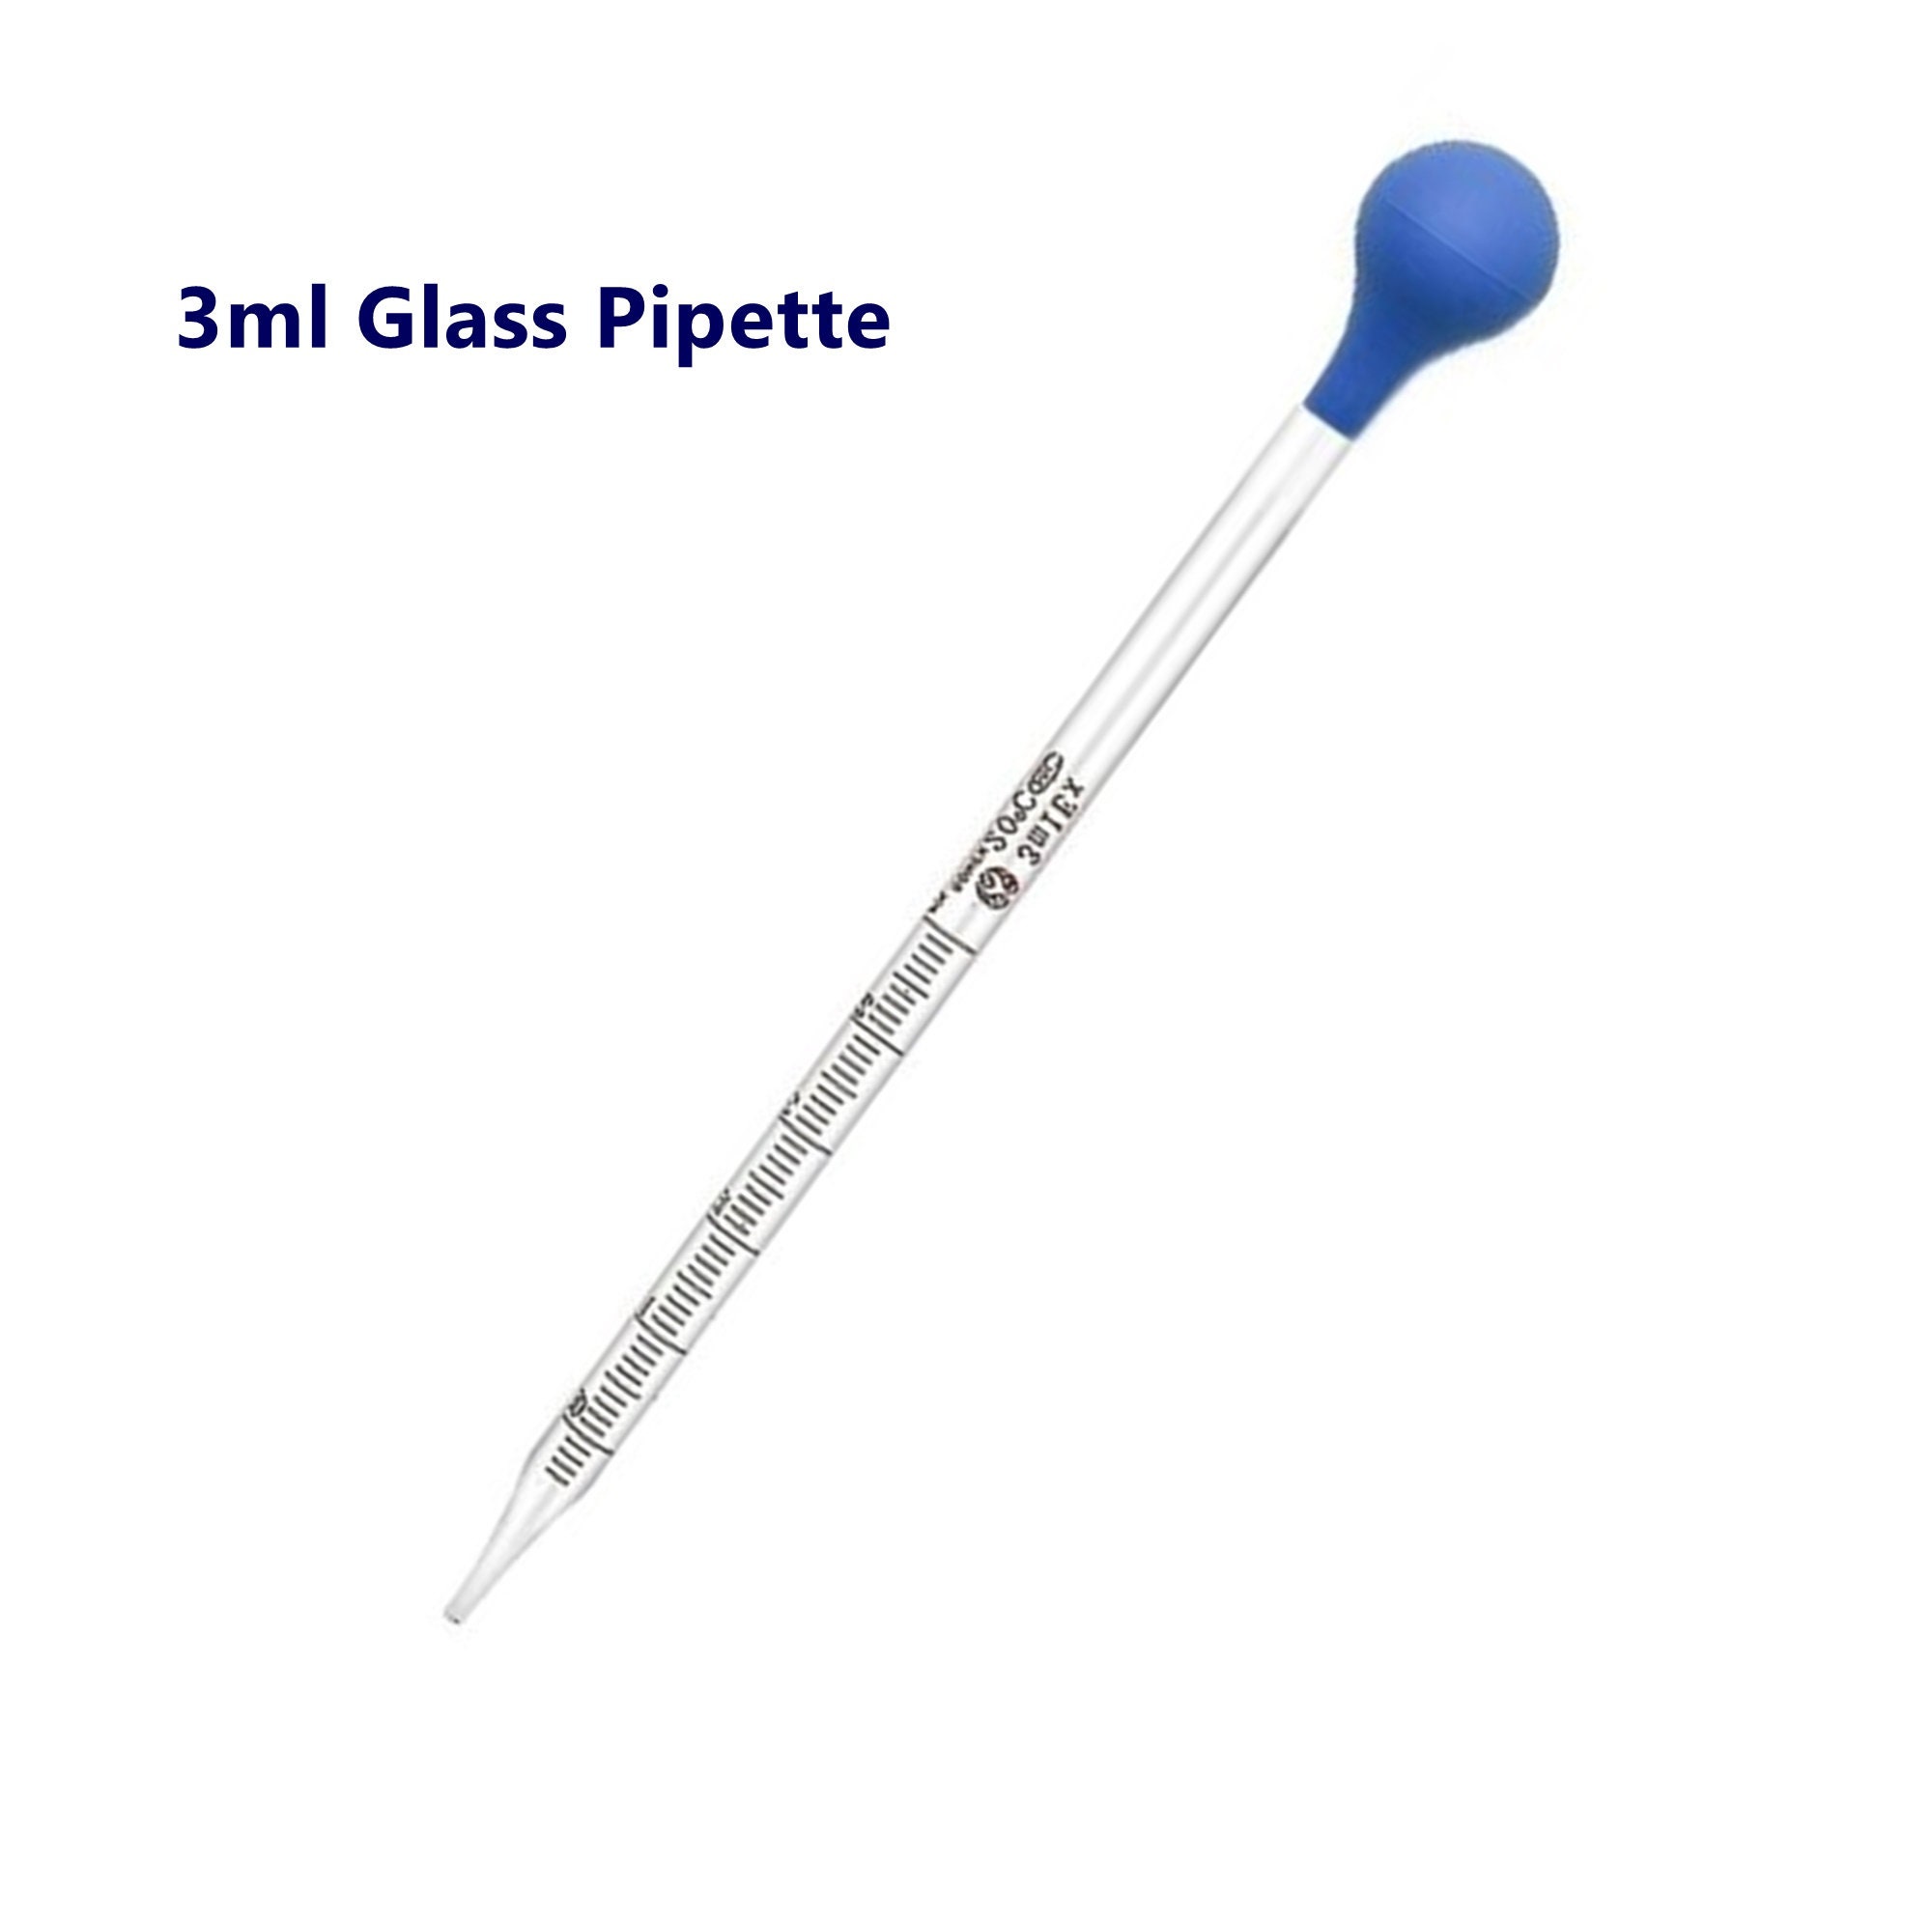 PIPETTE DROPPERS 3 ML Size Reusable Clear Glass Measuring Tool for  Essential & Fragrance Oils I Removable Rubber Bulb 20cm Long 